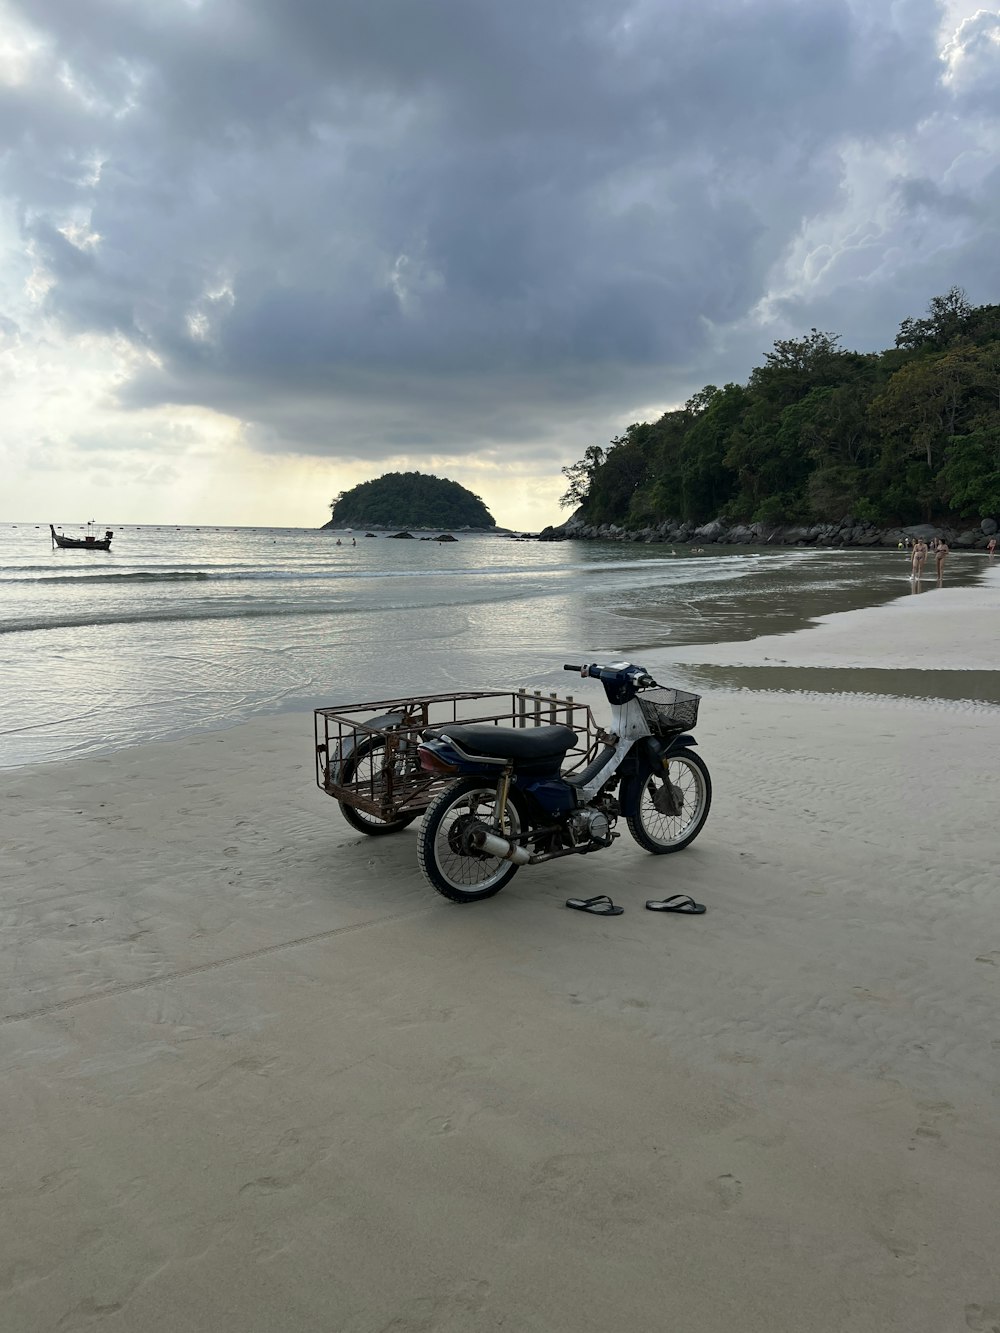 a motorcycle parked on a beach next to the ocean